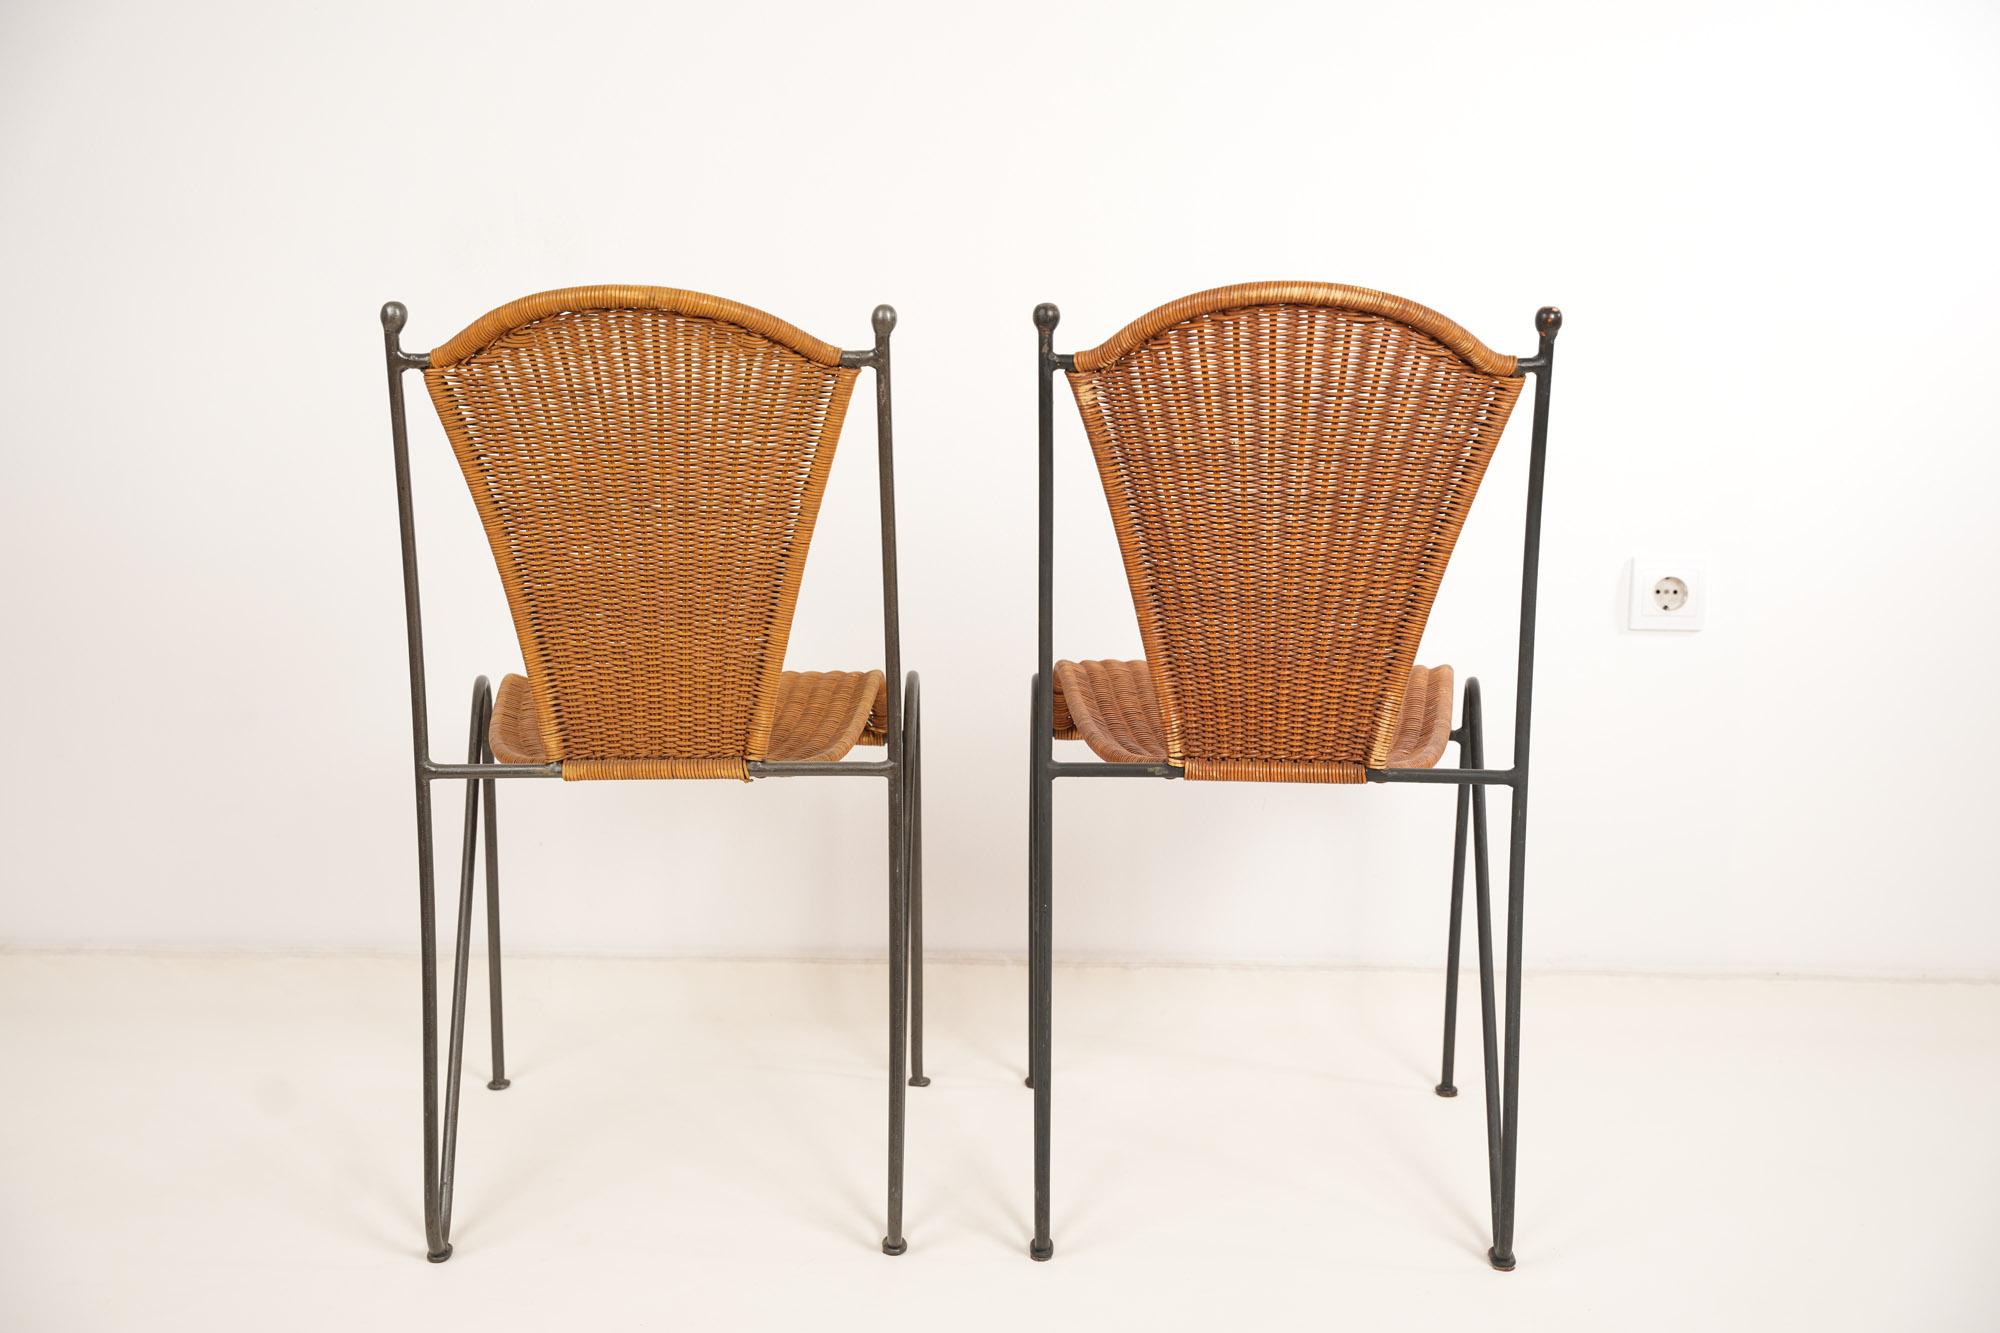 Set of Four Wicker and Iron Chair By Frederic Weinberg 1950s For Sale 1